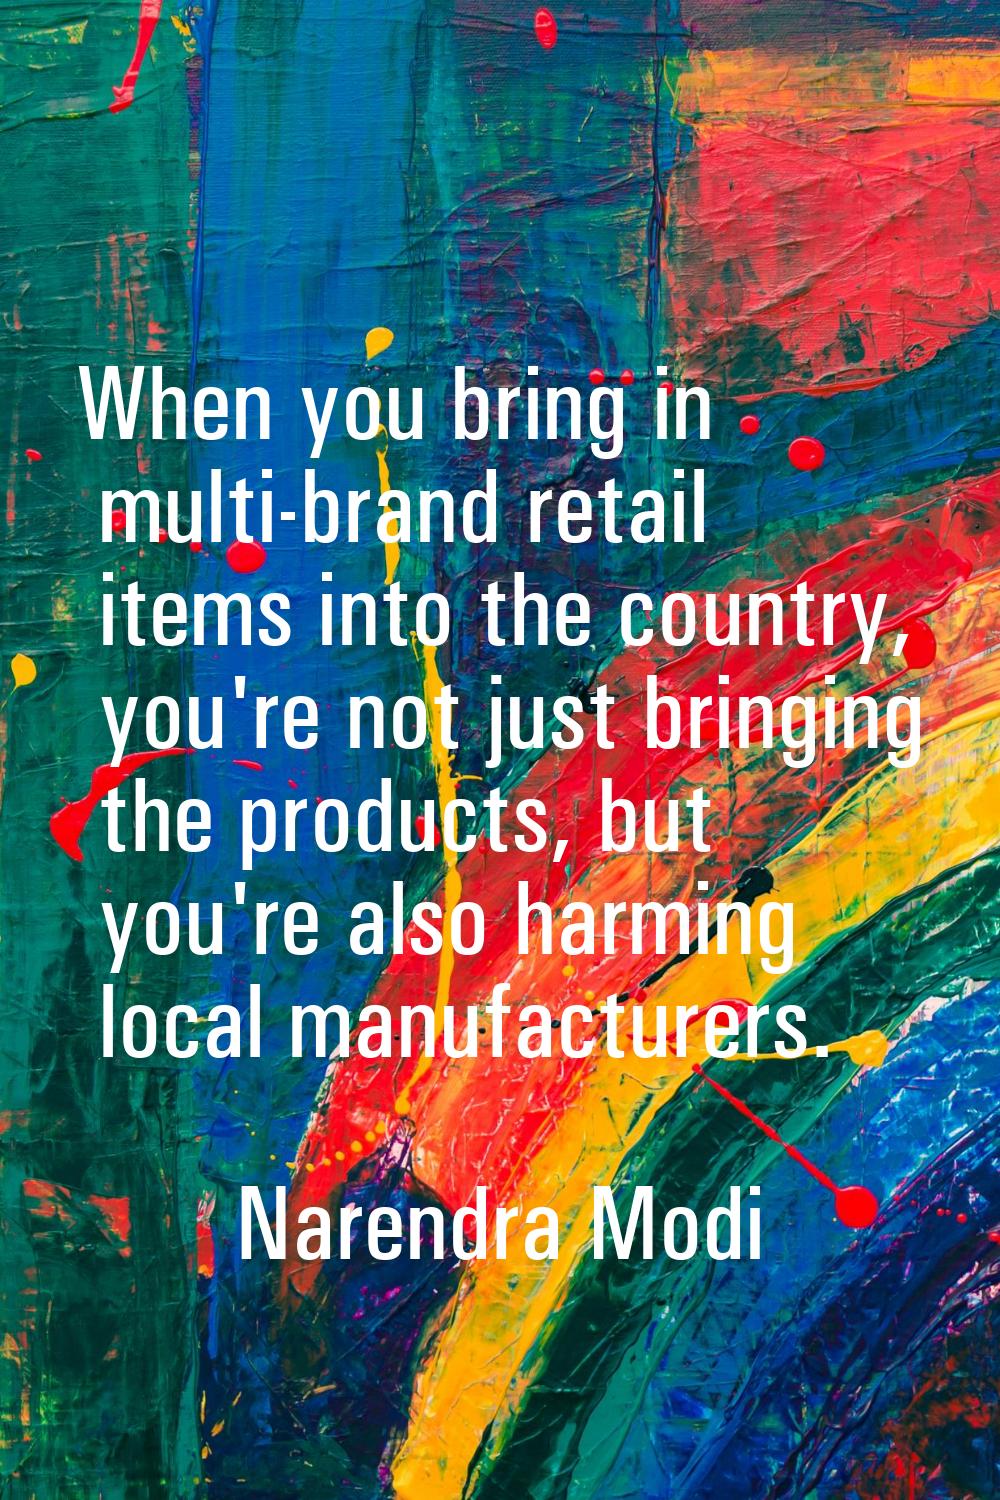 When you bring in multi-brand retail items into the country, you're not just bringing the products,